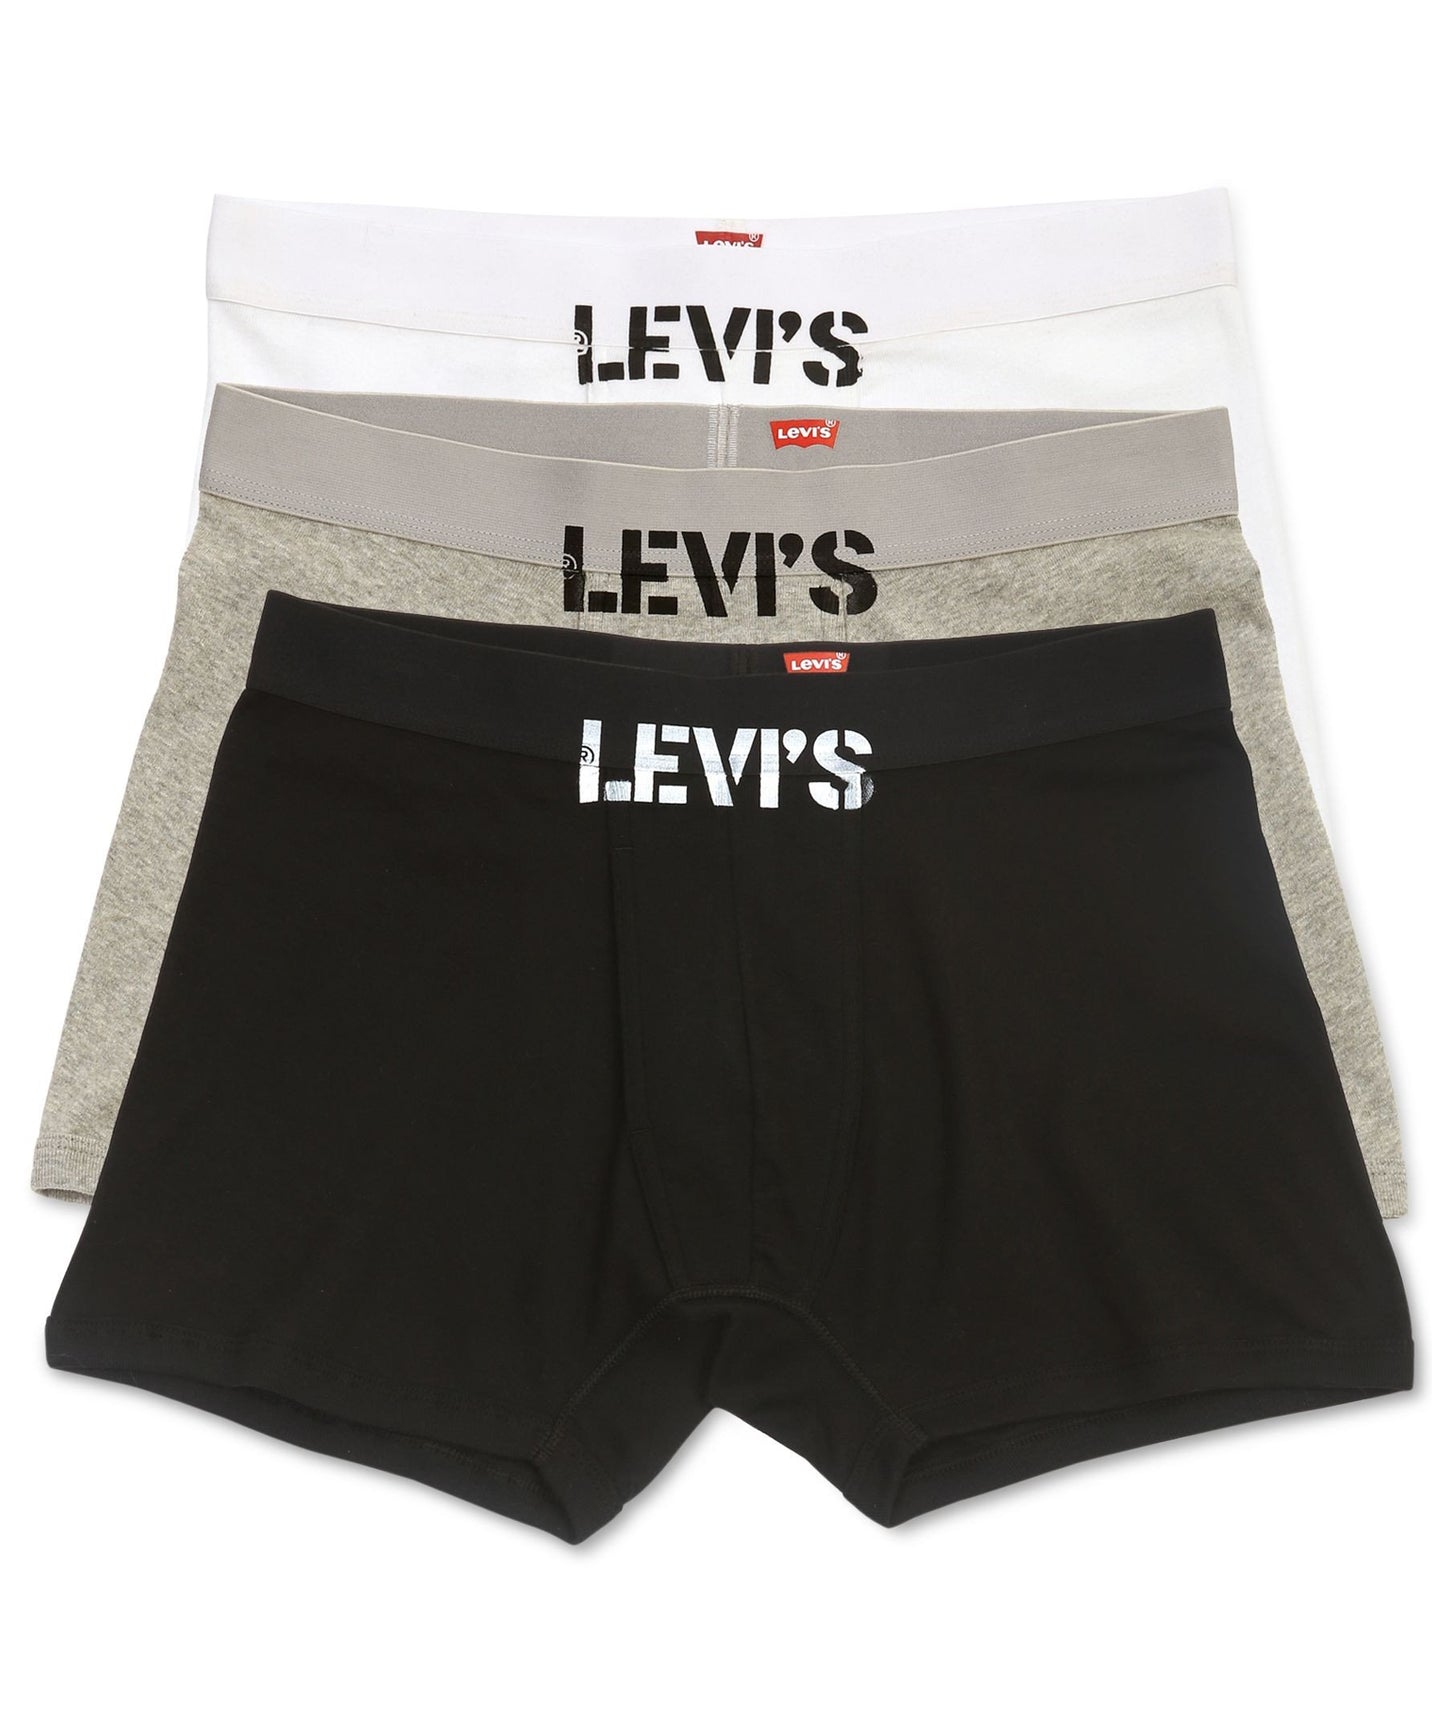 Levis Gry/Red/Nvy 100 Series Men's Boxer Briefs 3-Pack